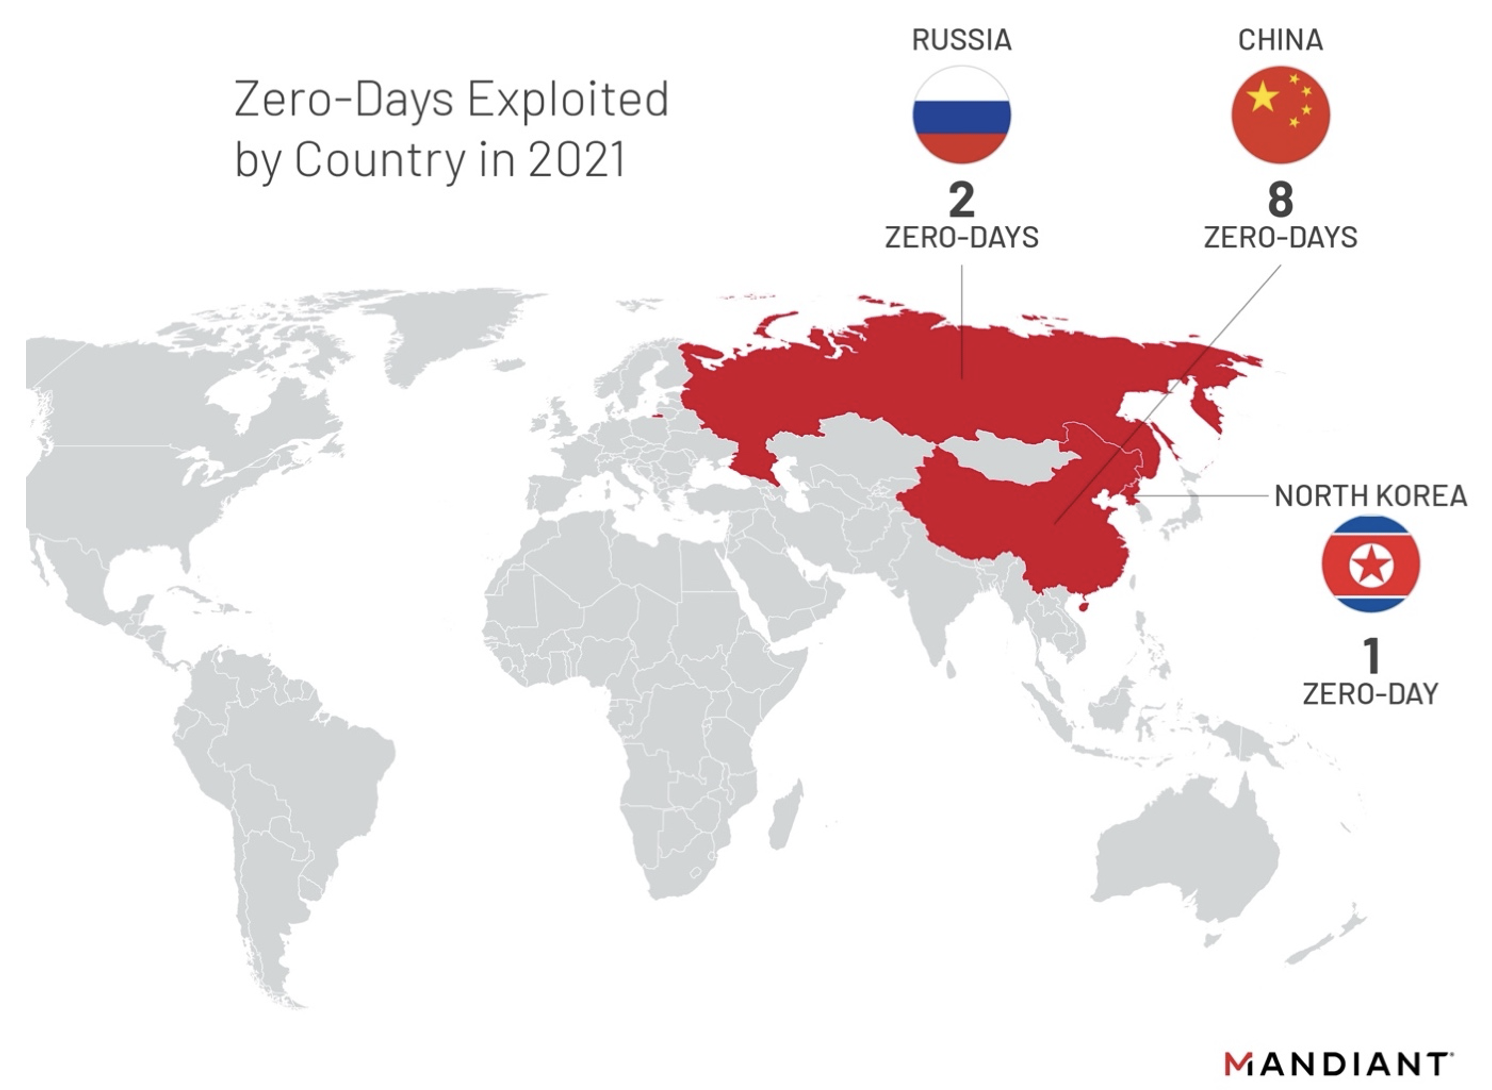 Experts warn of a surge in zero-day flaws observed and exploited in 2021